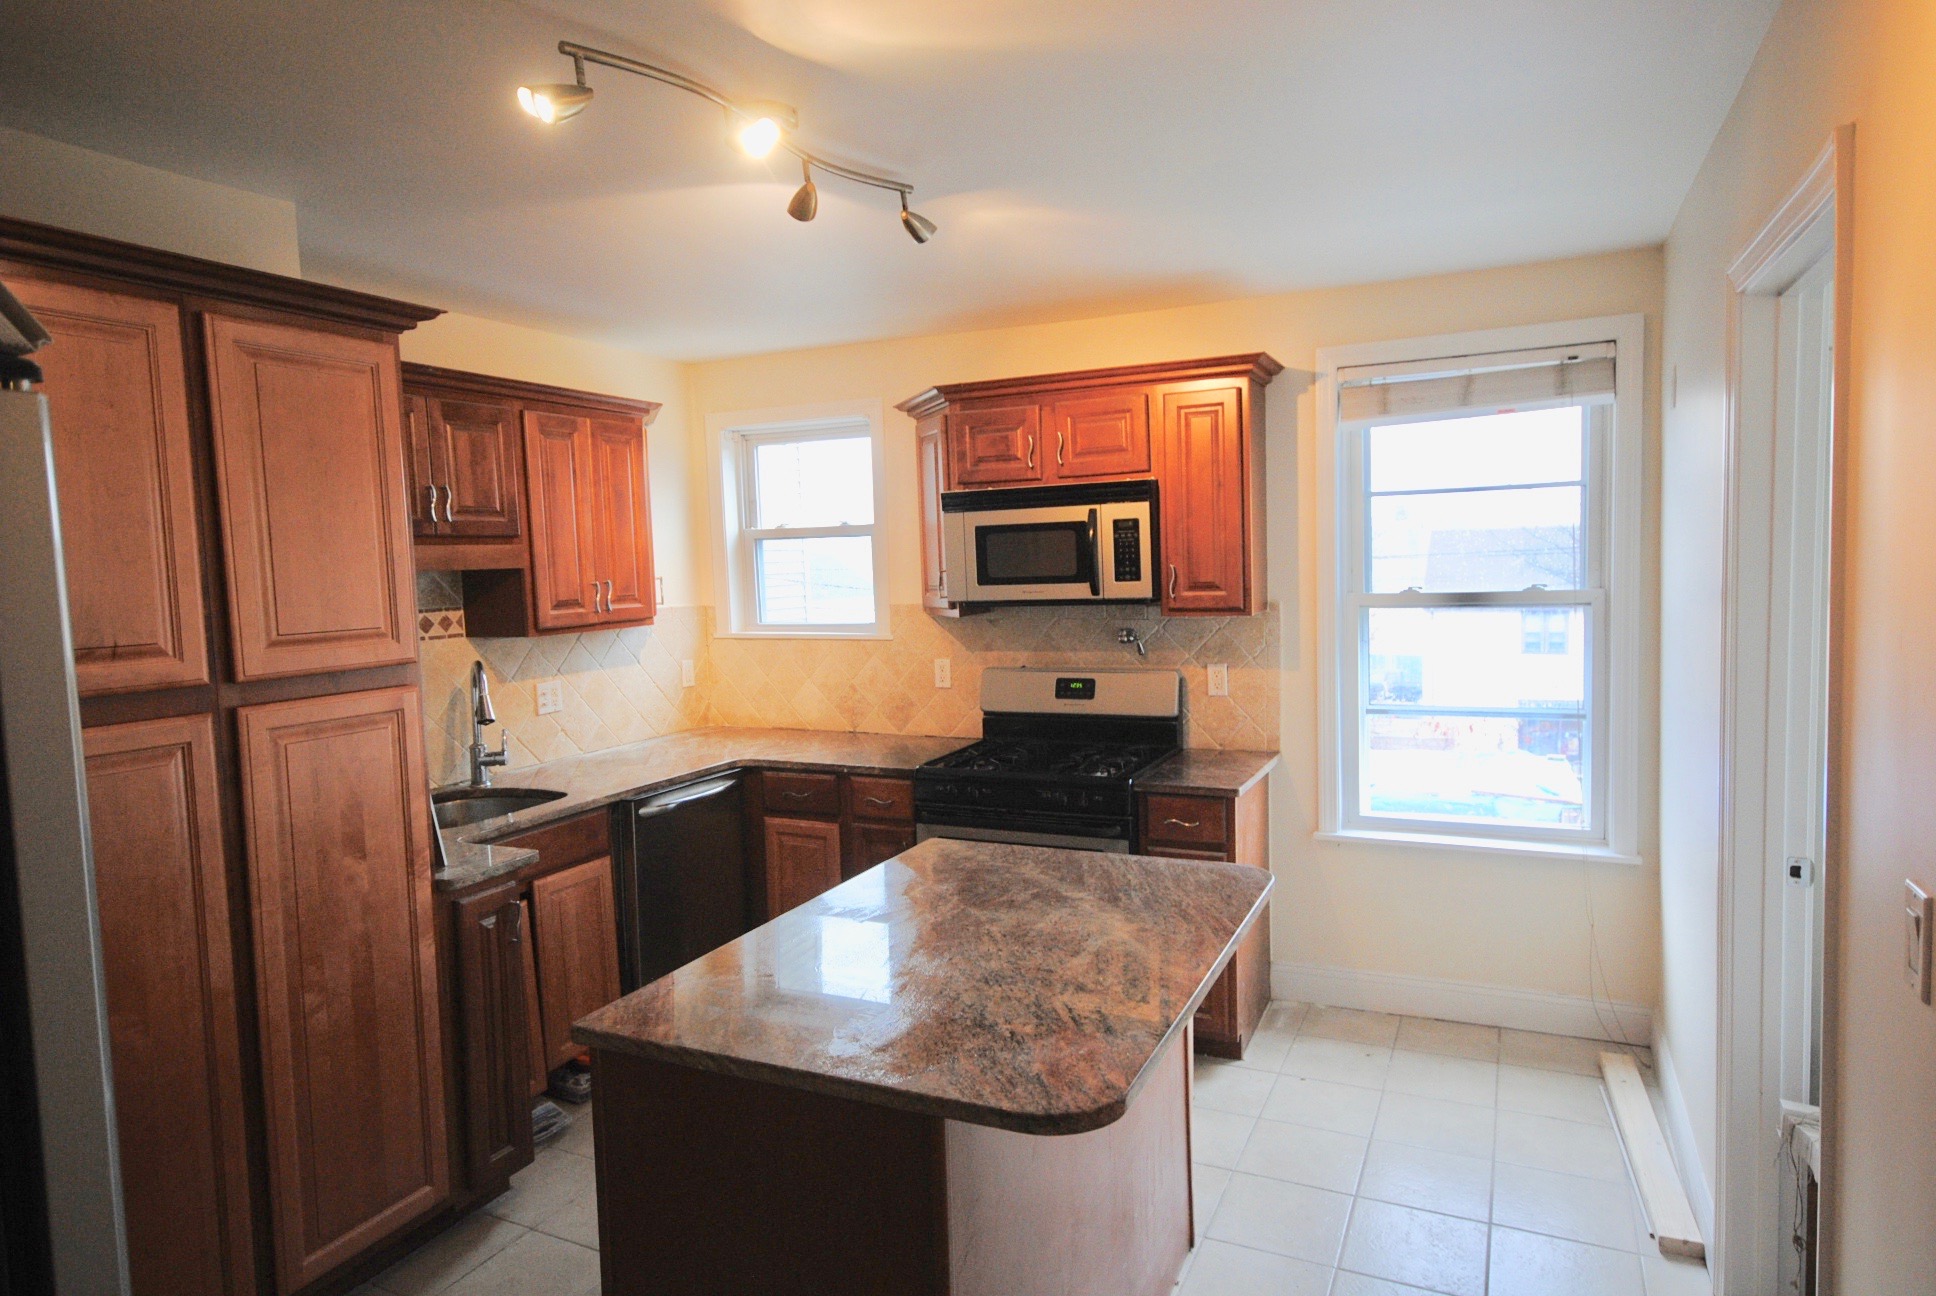 Photos of apartment on Shelby St.,Boston MA 02128